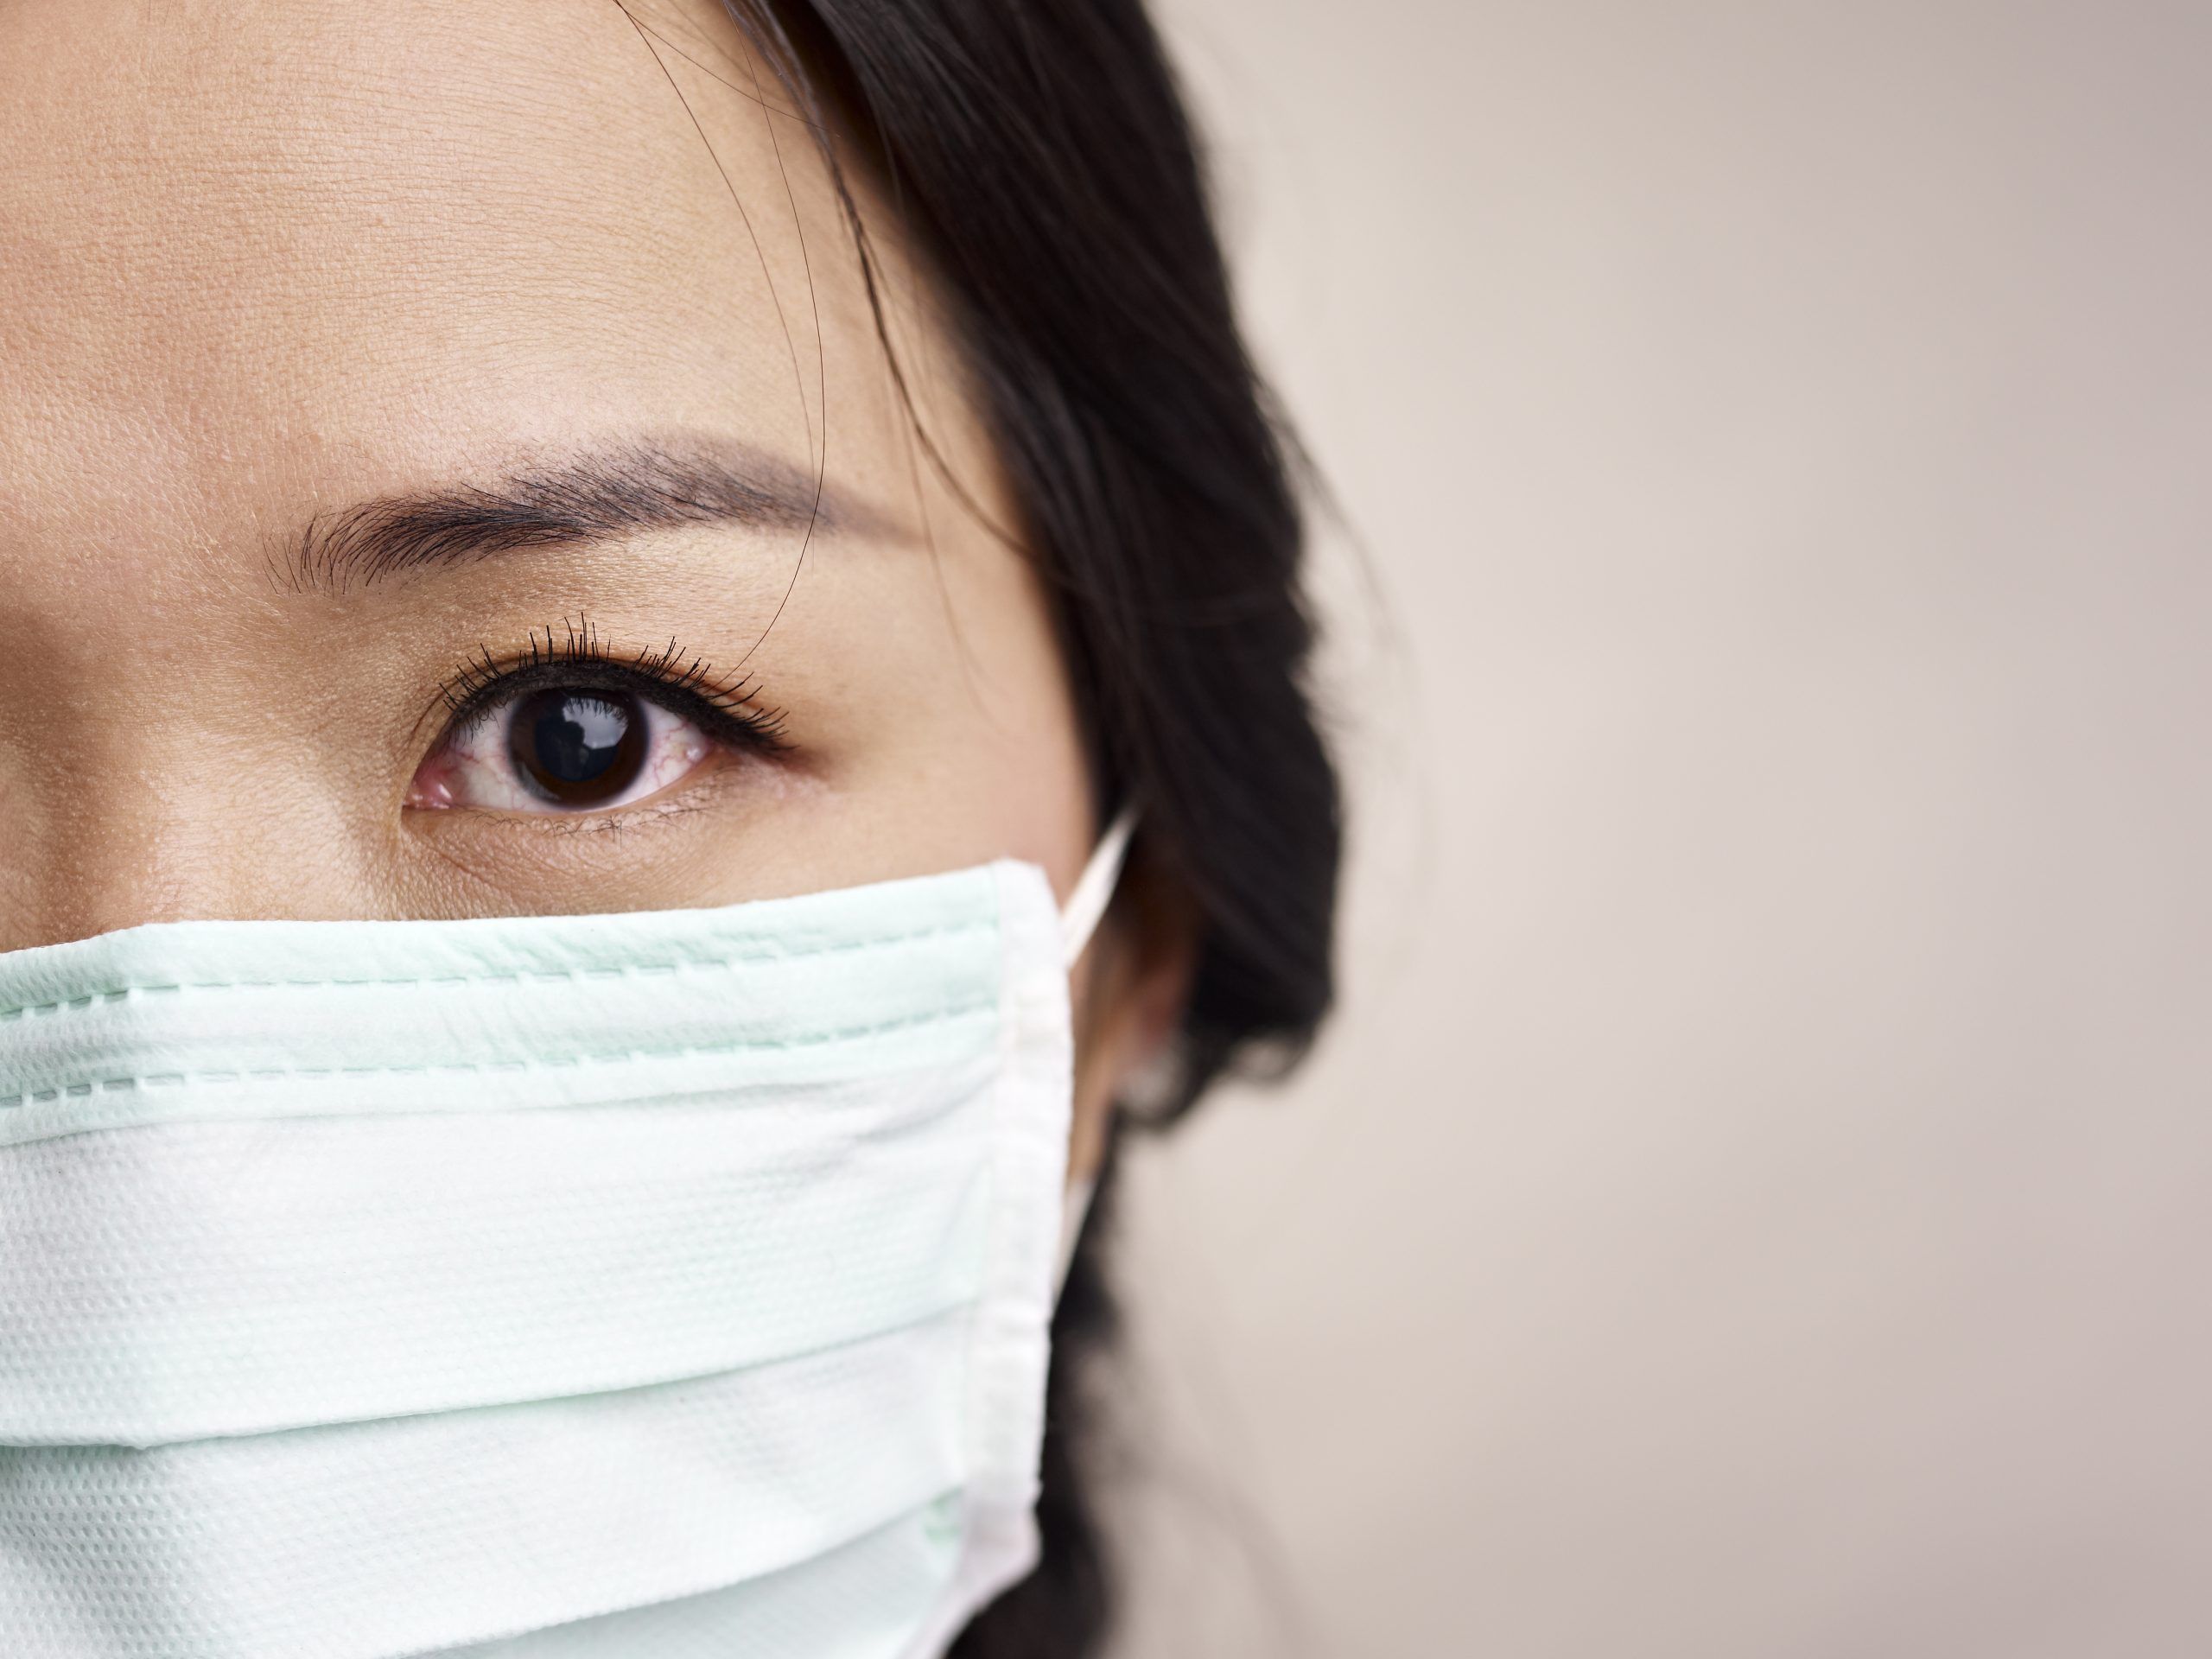 Face masks may increase the risk of dry, irritated eyes.